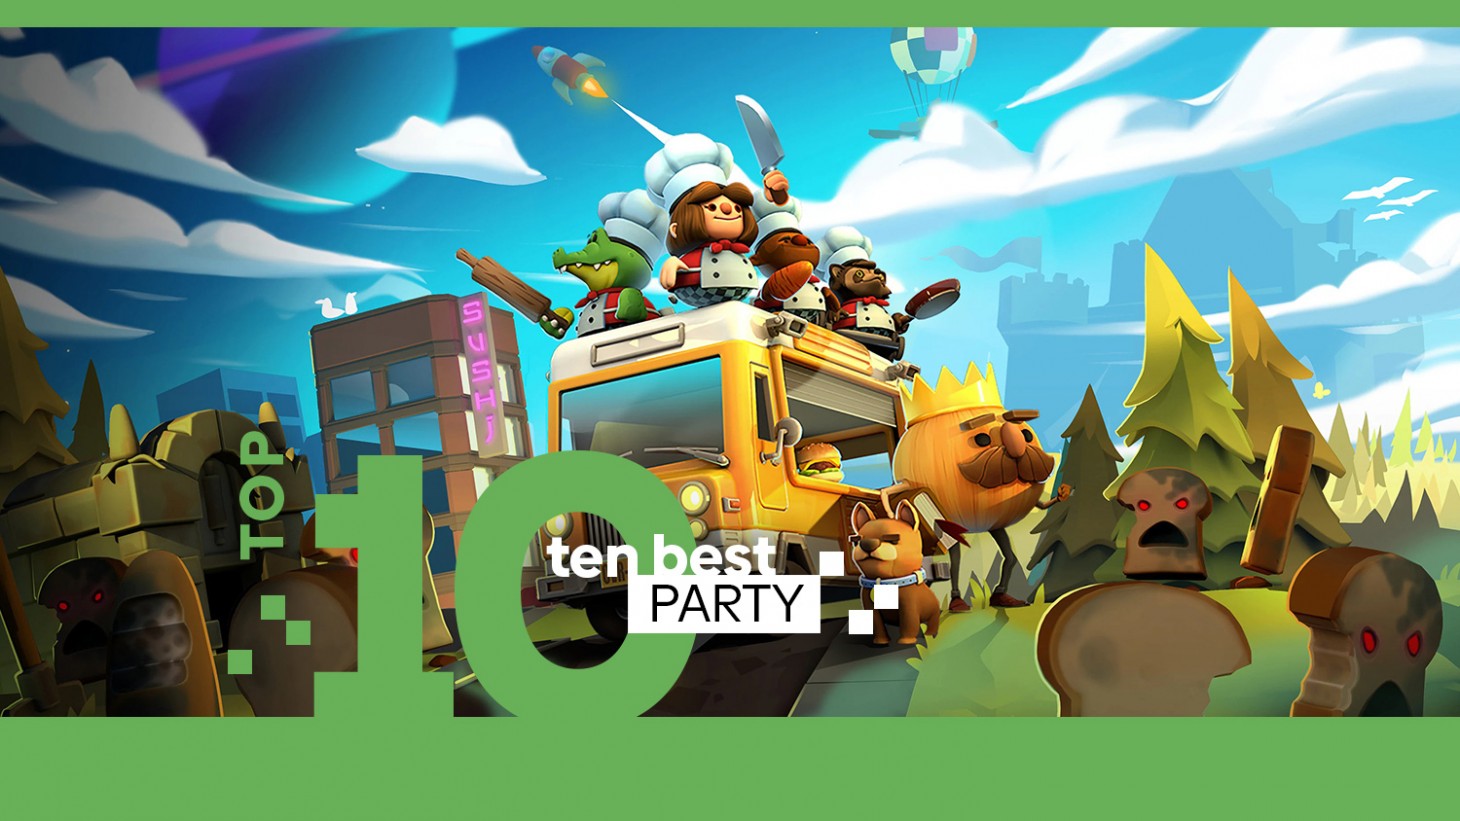 Top 10 Party Games To Play Right Now - Game Informer